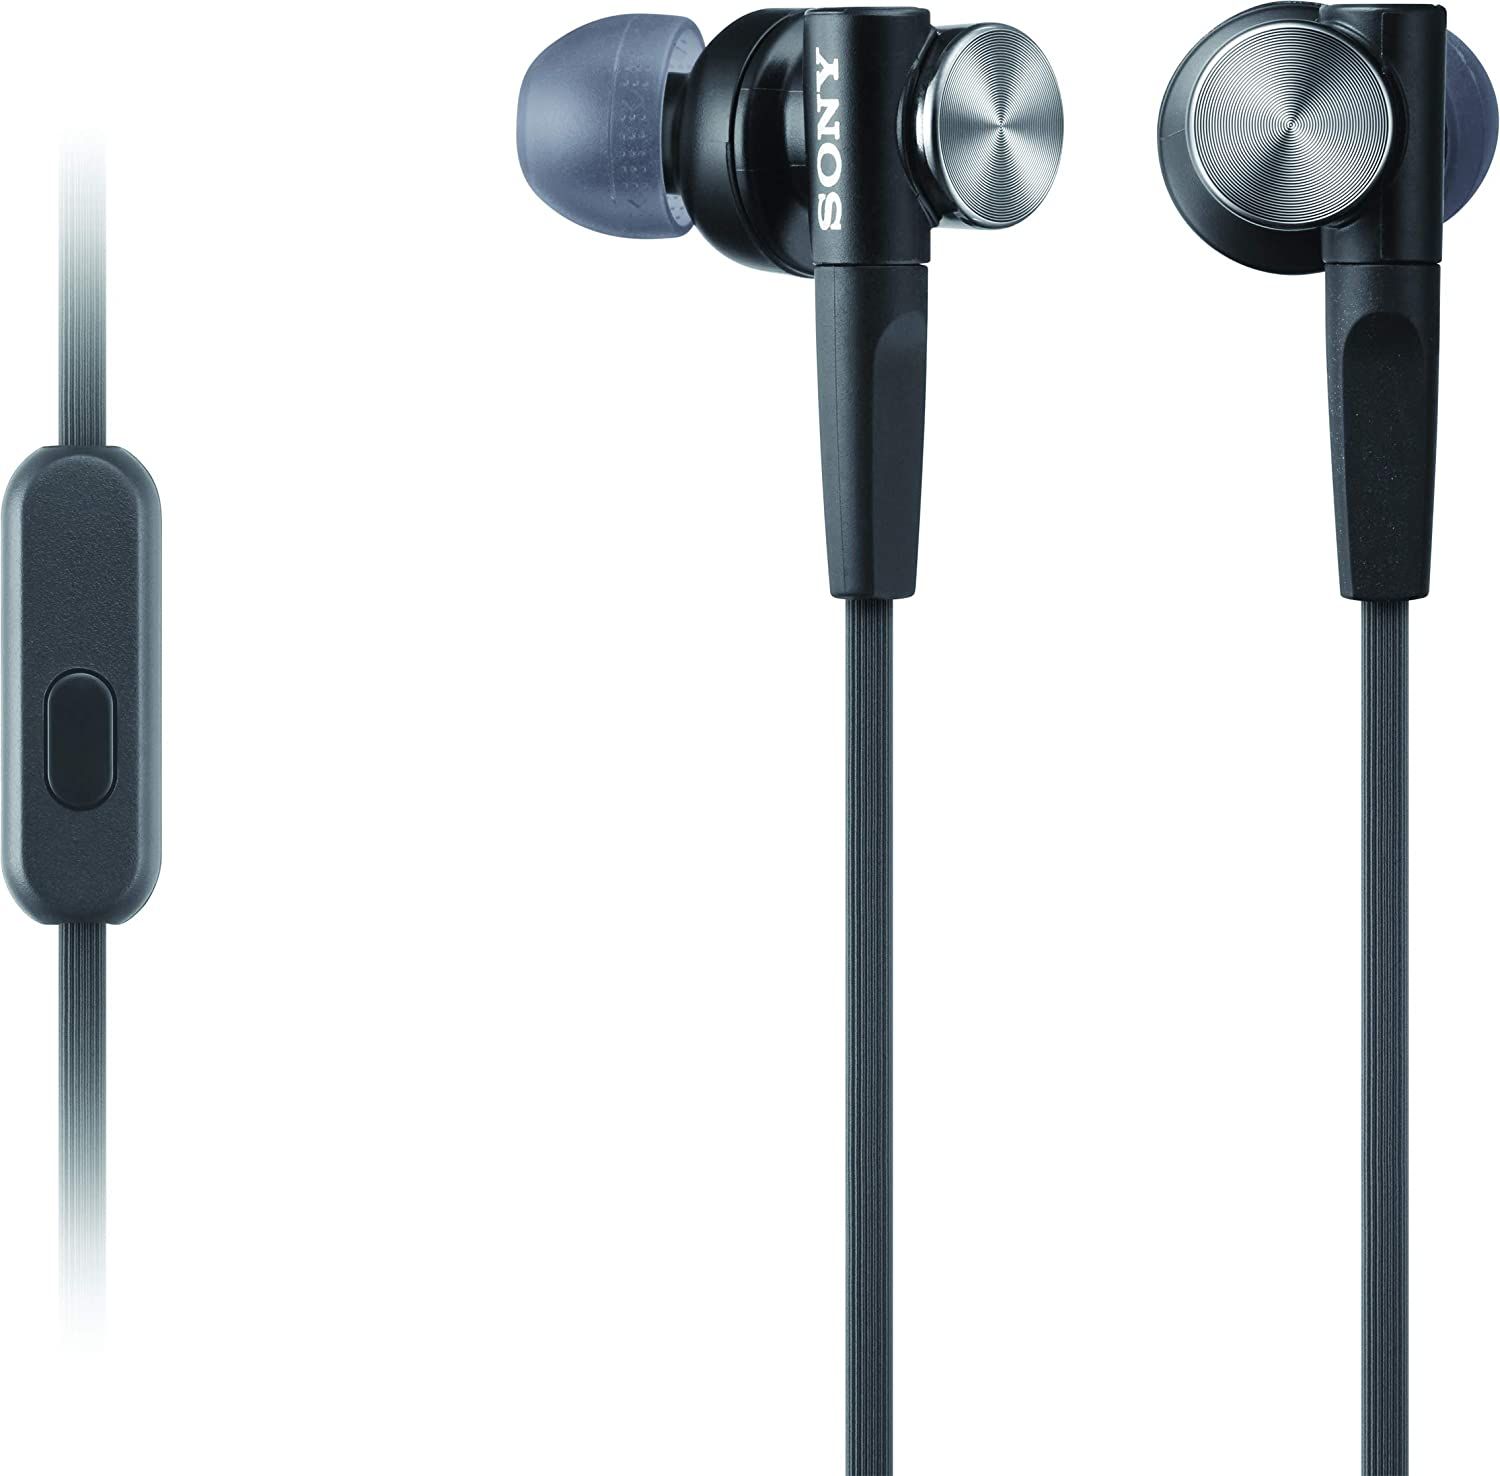 Best Wired Earbuds (Updated 2021)